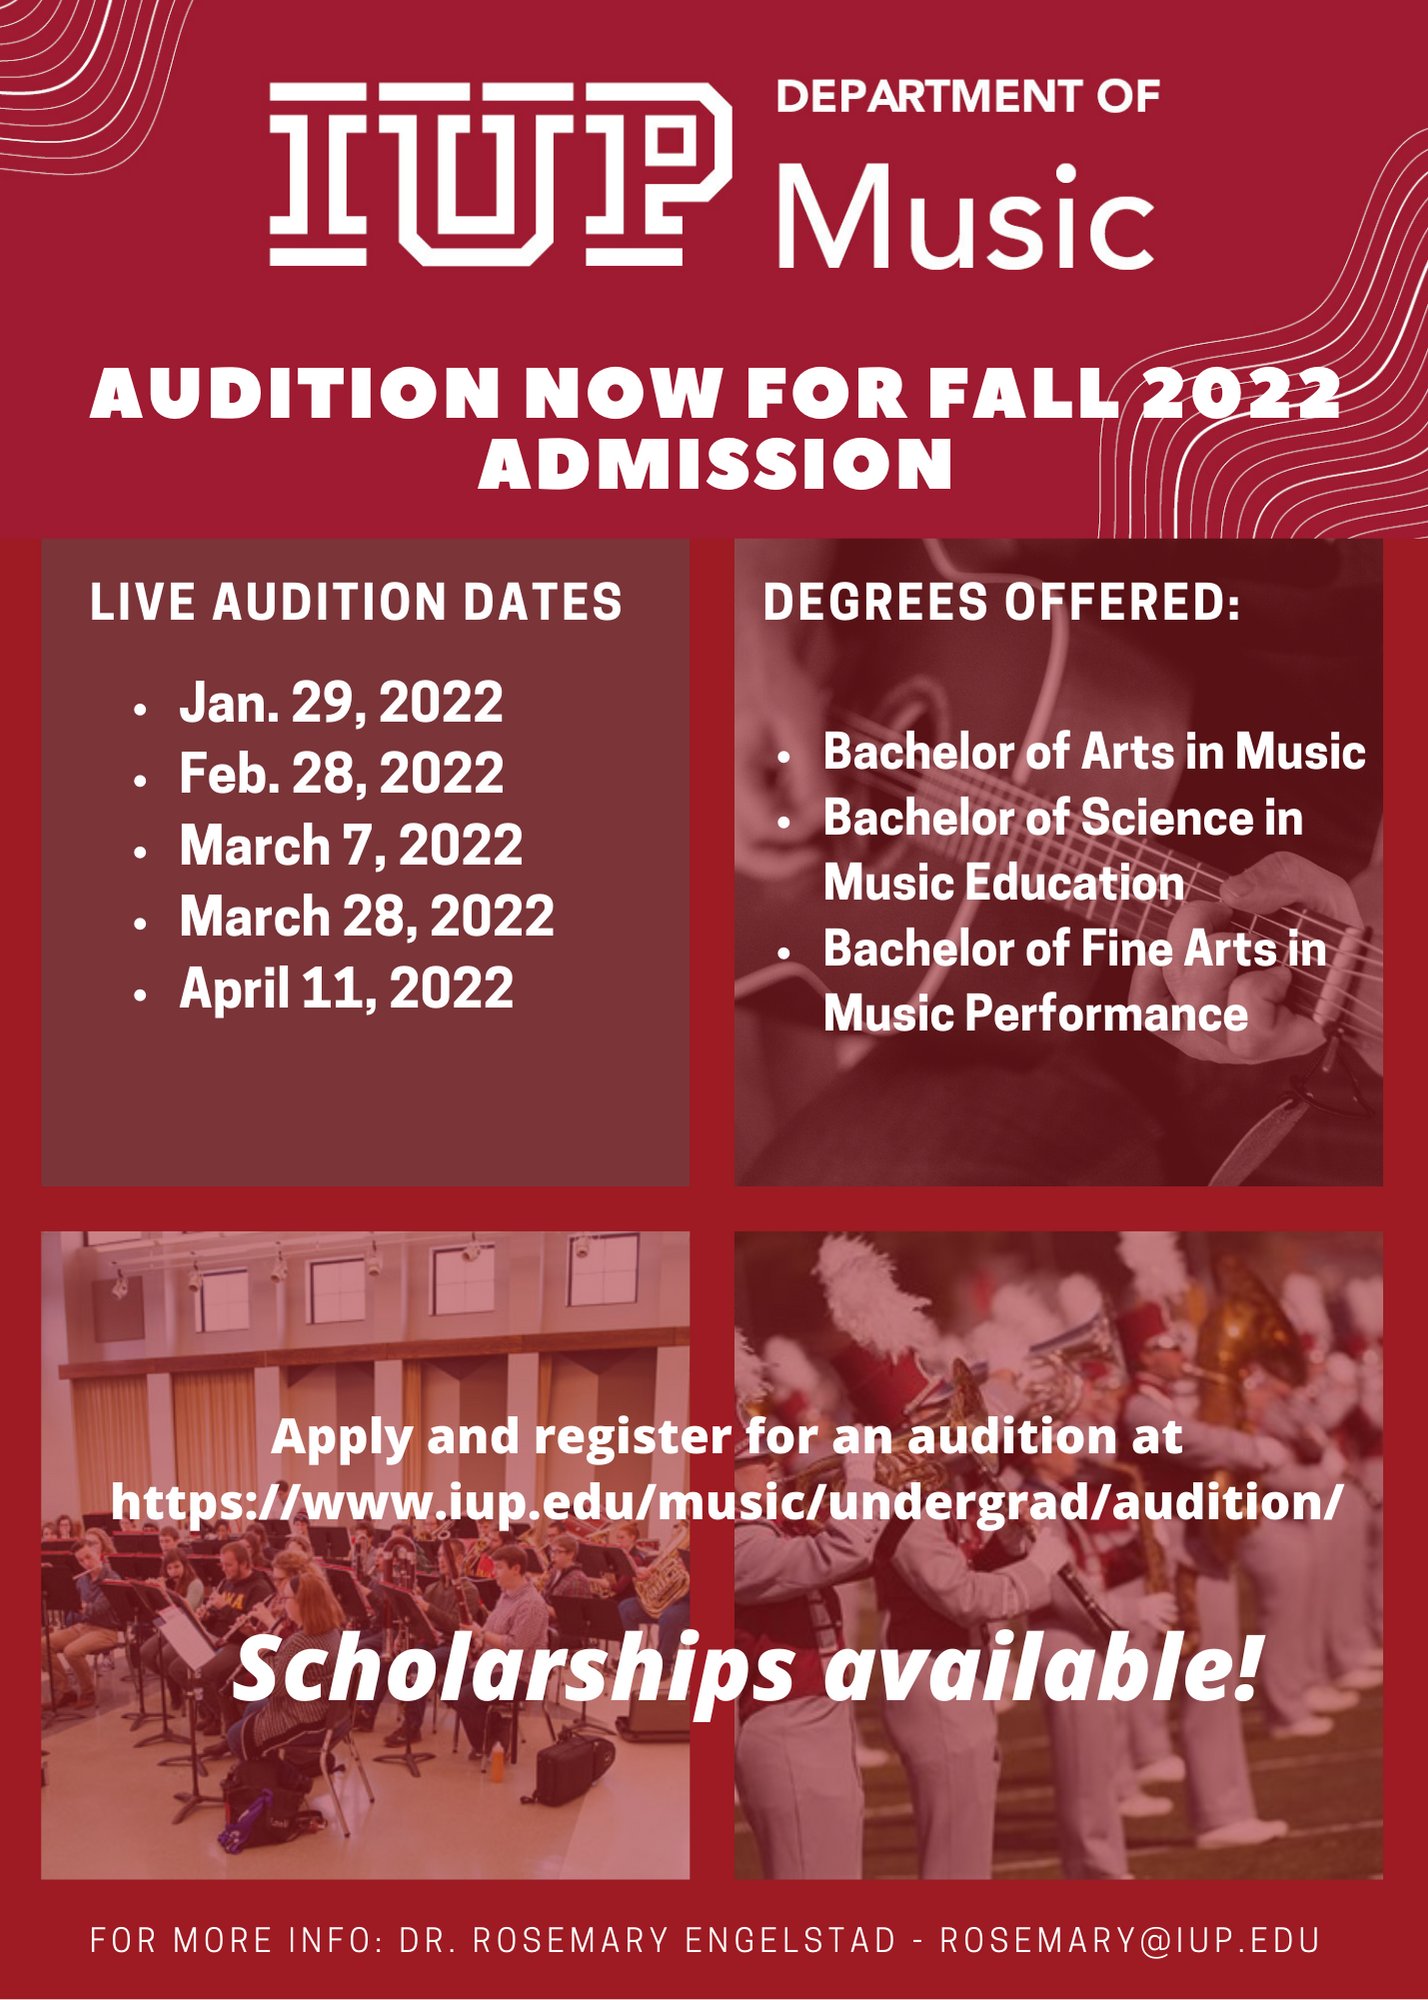 Iup Fall 2022 Schedule Iup Music On Twitter: "Still Need To Apply Or Schedule Your Audition? We  Can't Wait To Hear You And Meet You! Visit Our Website To Learn More Or  Reach Out If You